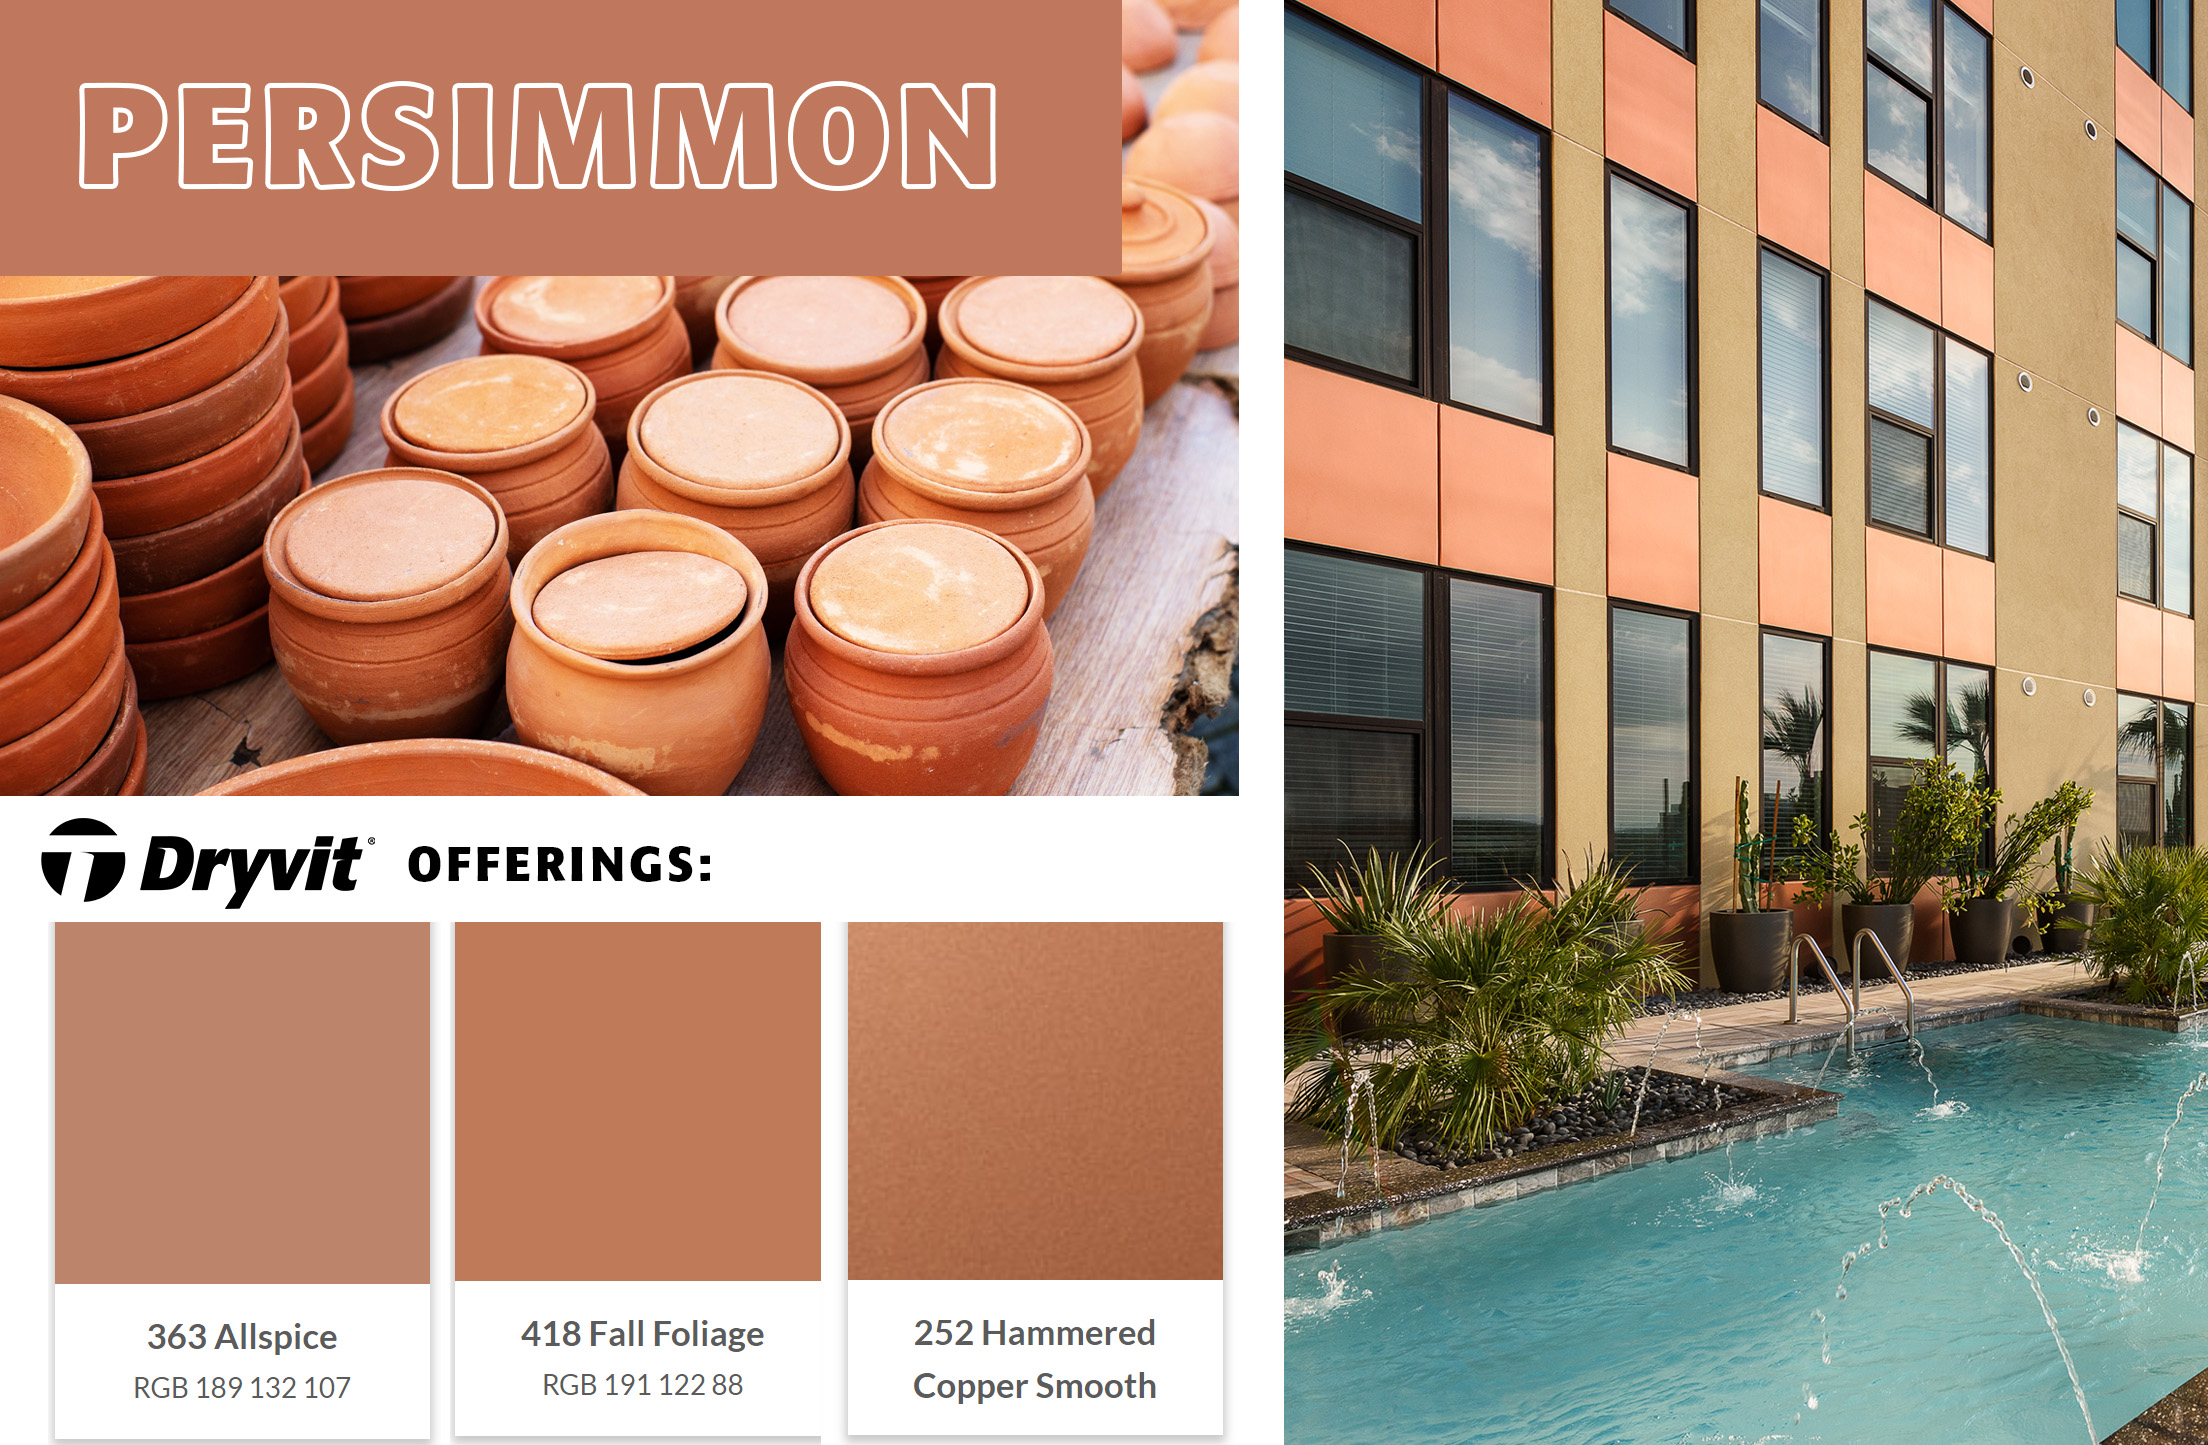 A collage of images showing a color reminisent of allspice and fired clay. Pictures include some clay pots and a commercial building with reflective metallic exterior finish in this orange color.